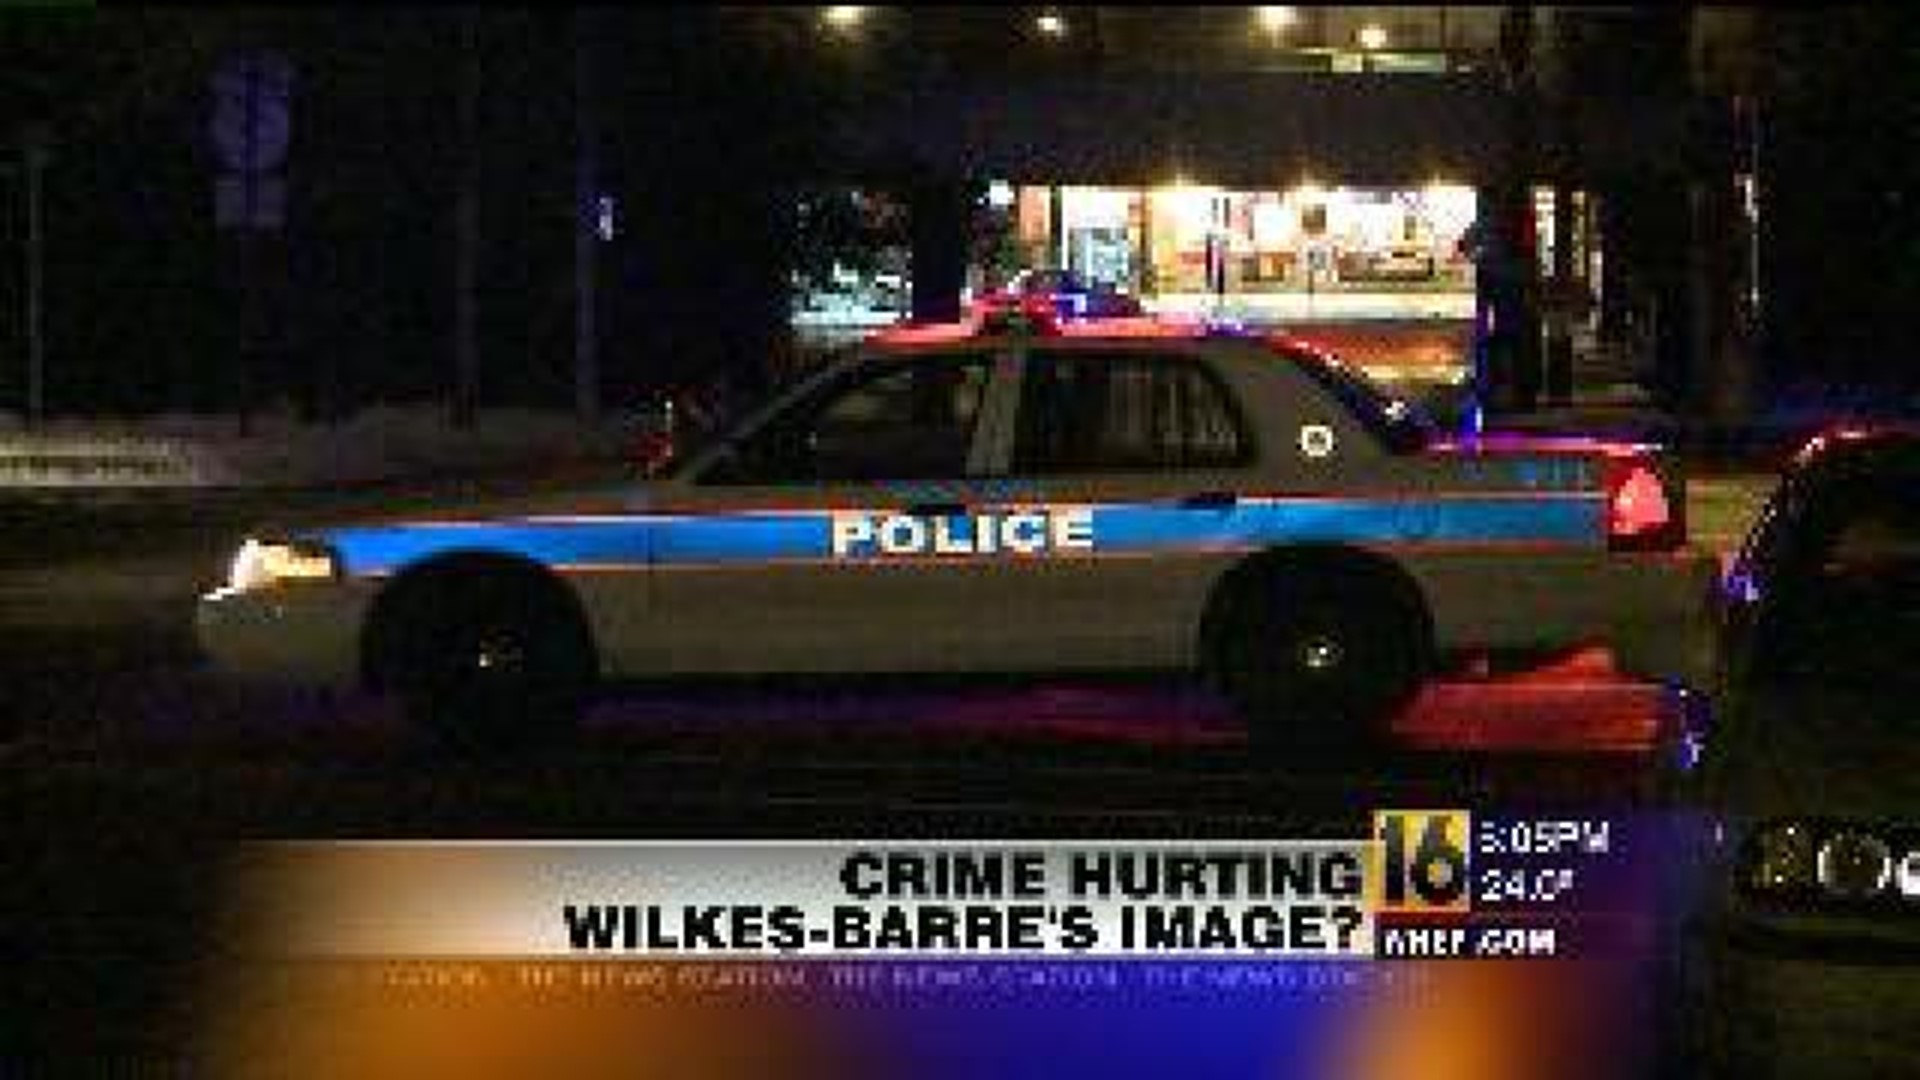 Is Crime Hurting Wilkes-Barre's Image?